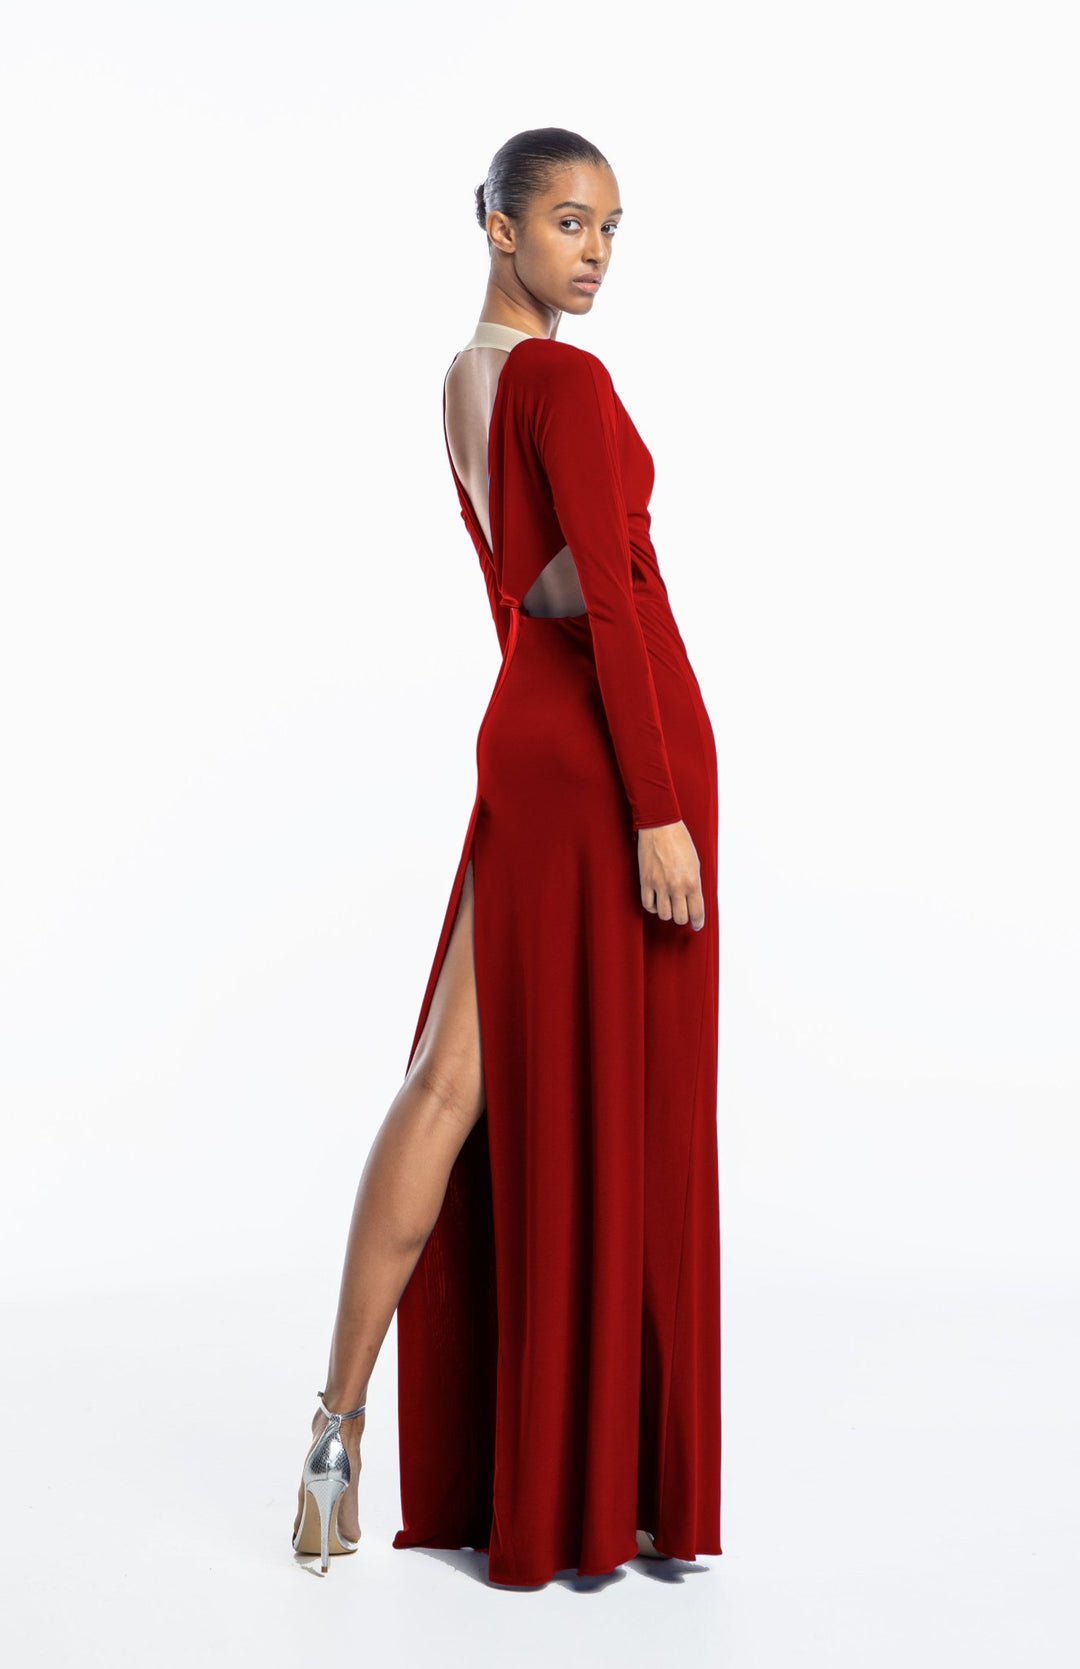 Grecian style, long backless dress, with back cutout detail in red jersey knit